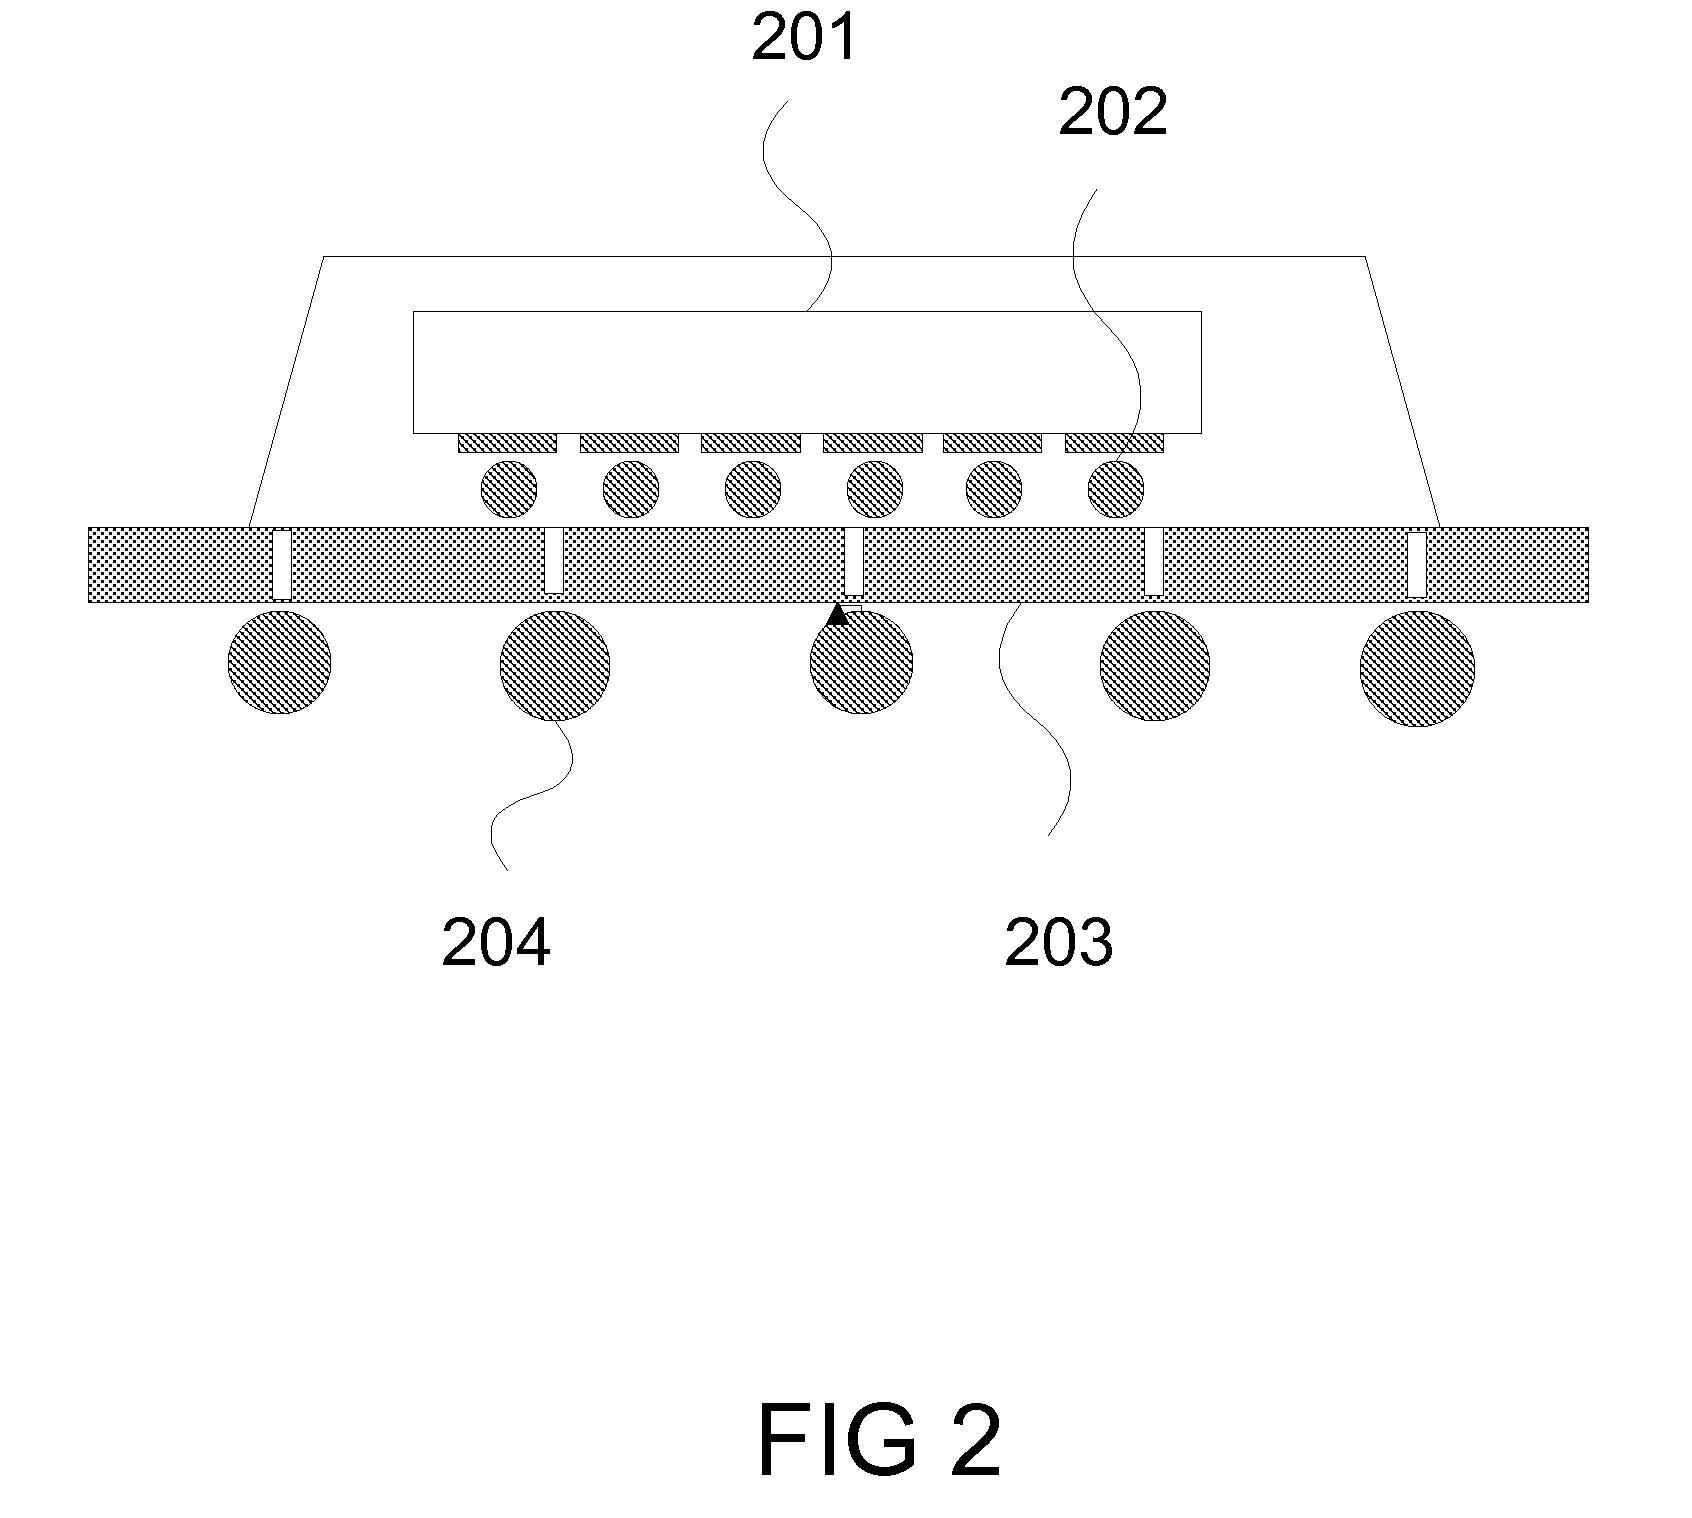 Stacking Integrated Circuits containing Serializer and Deserializer Blocks using Through Silicon Via